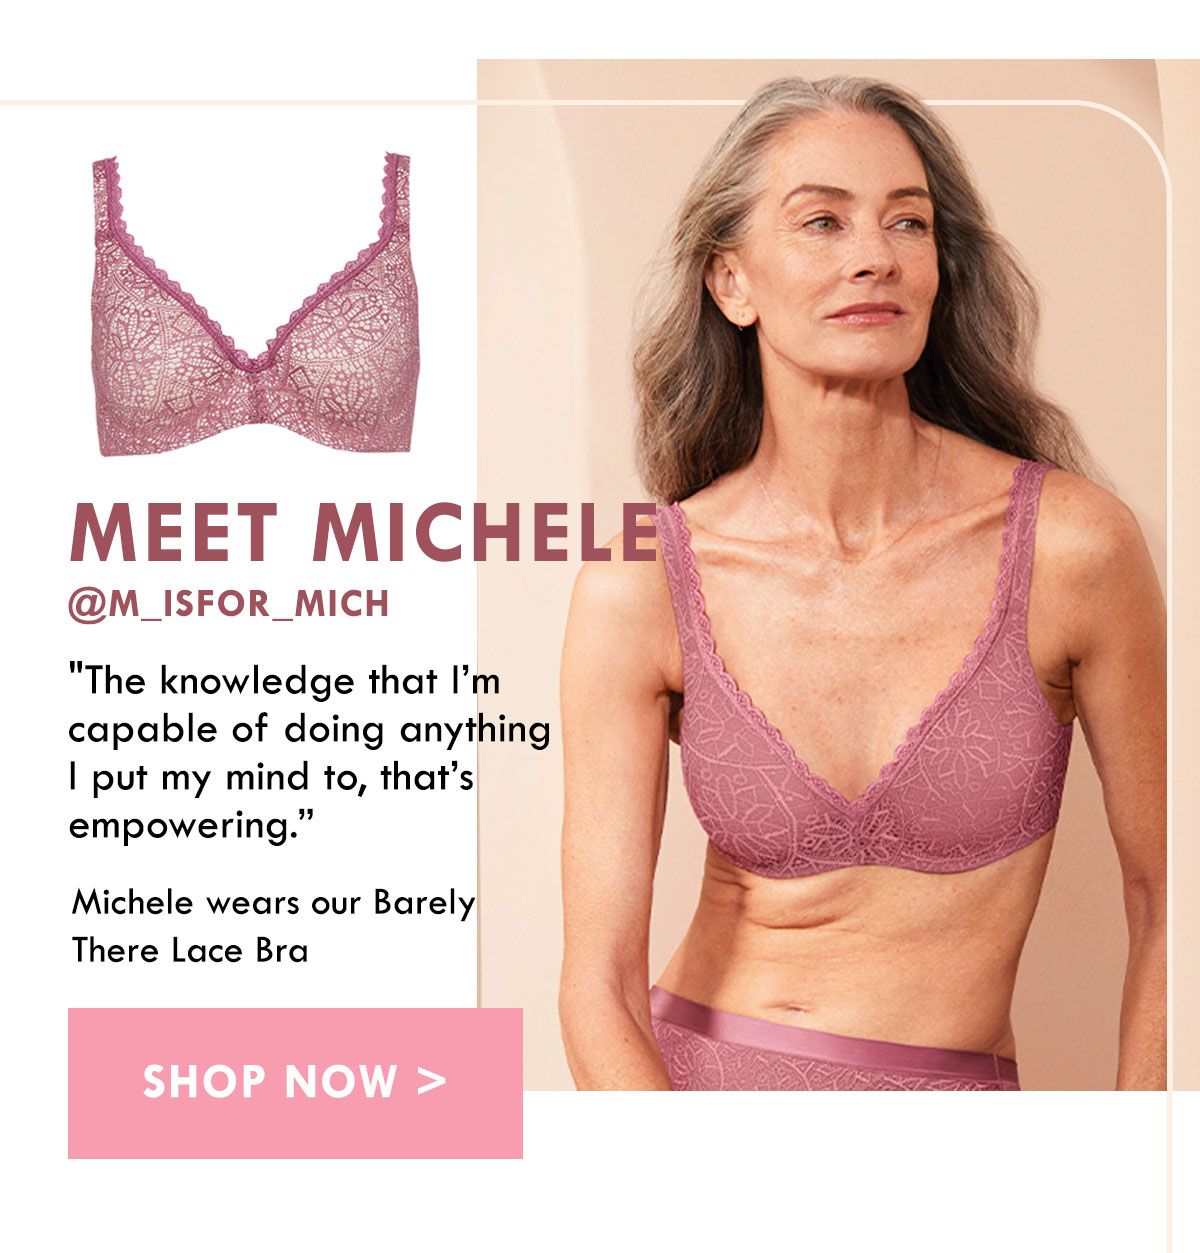 Meet Michele. Michele wears our Barely There Lace Bra. Shop Now.